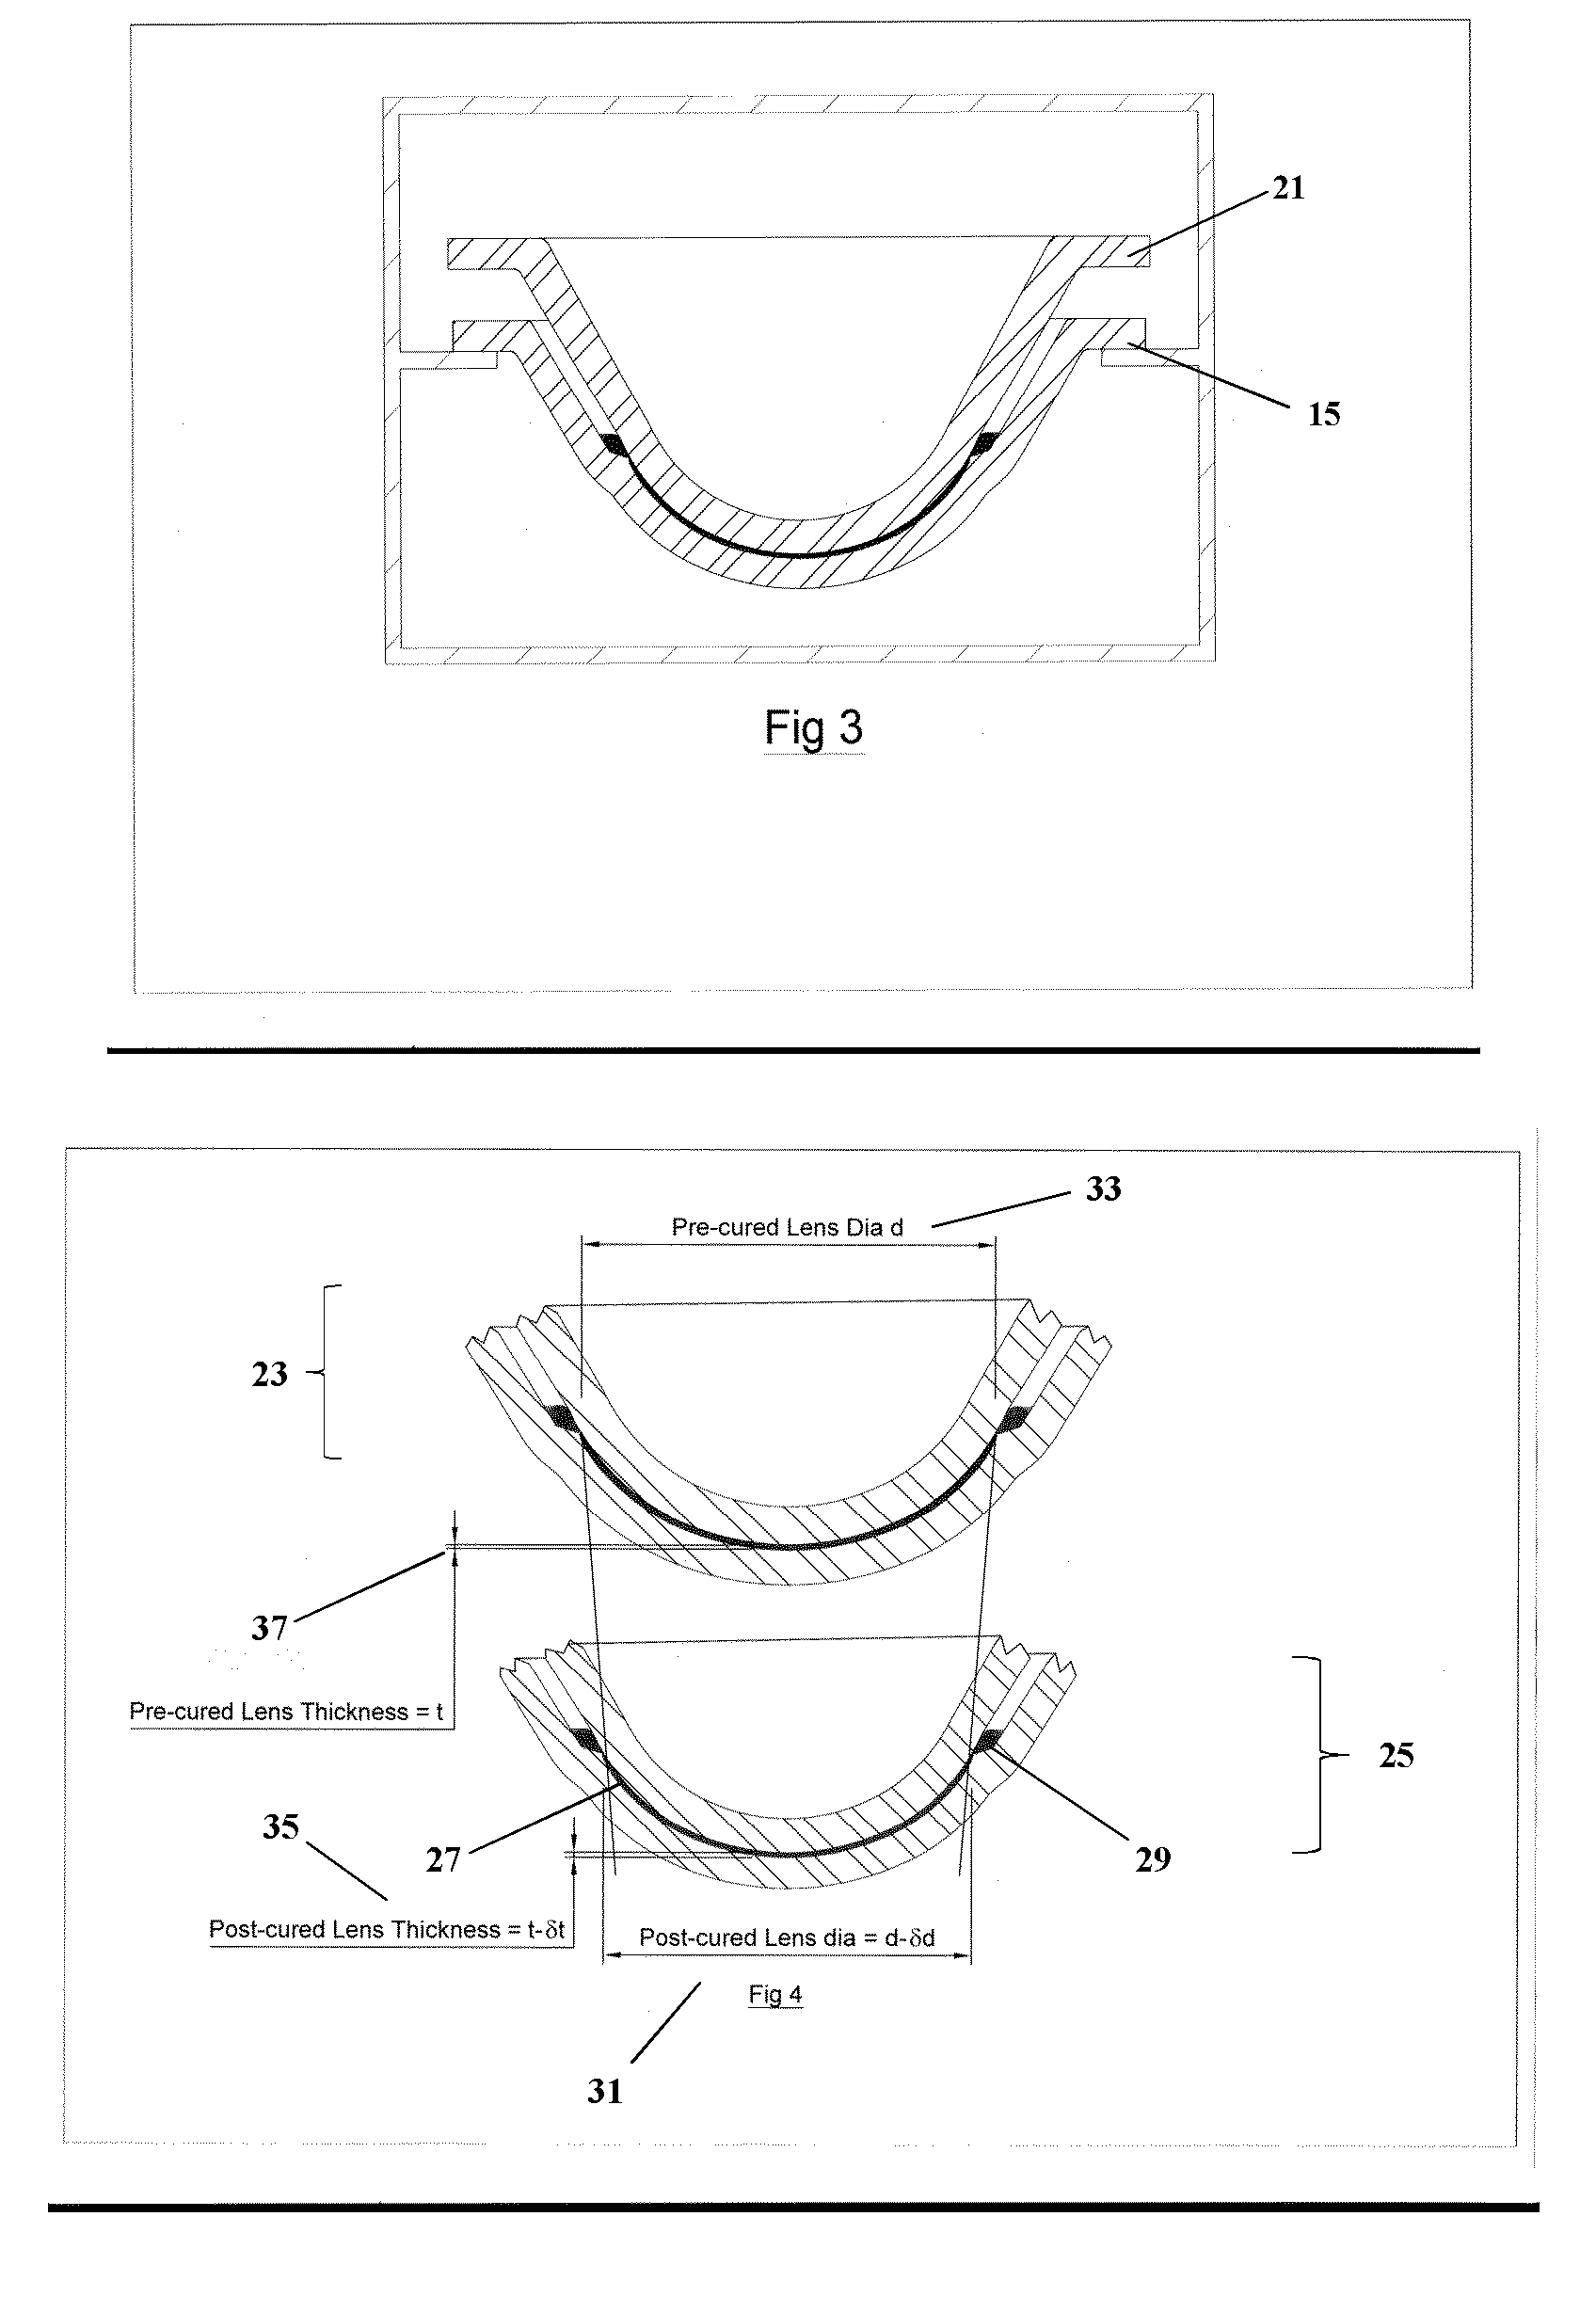 Contact lens manufacturing method